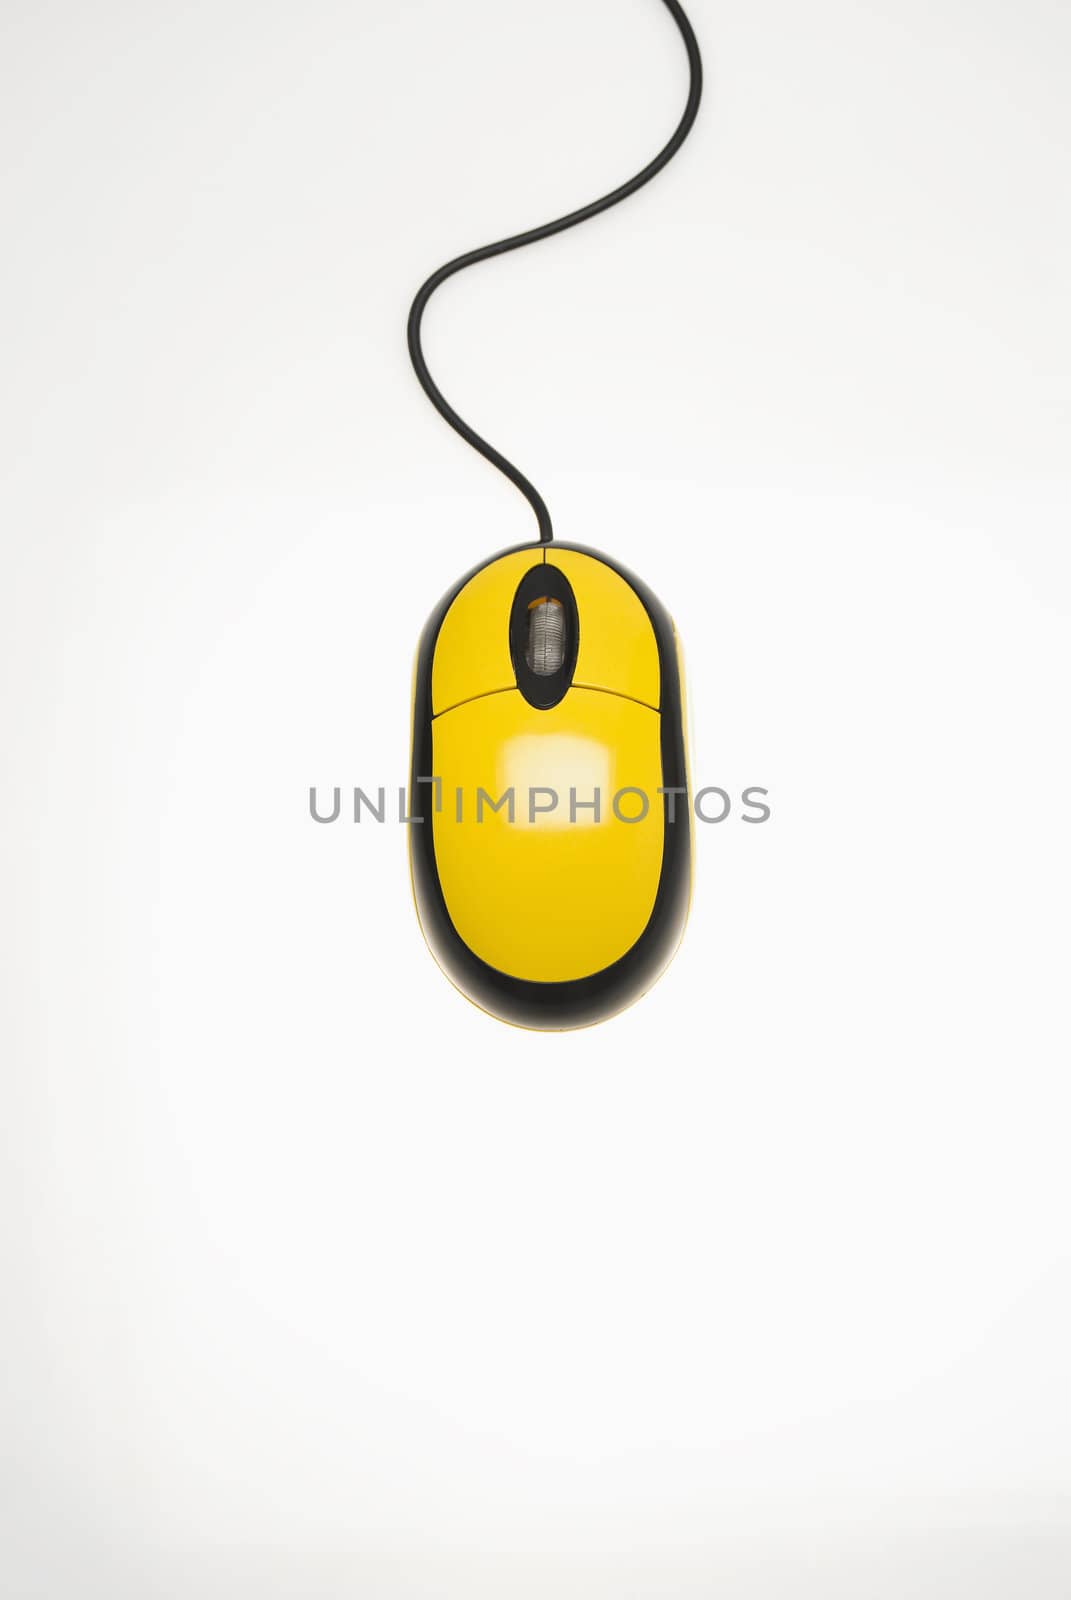 Studio shot of yellow computer mouse against white